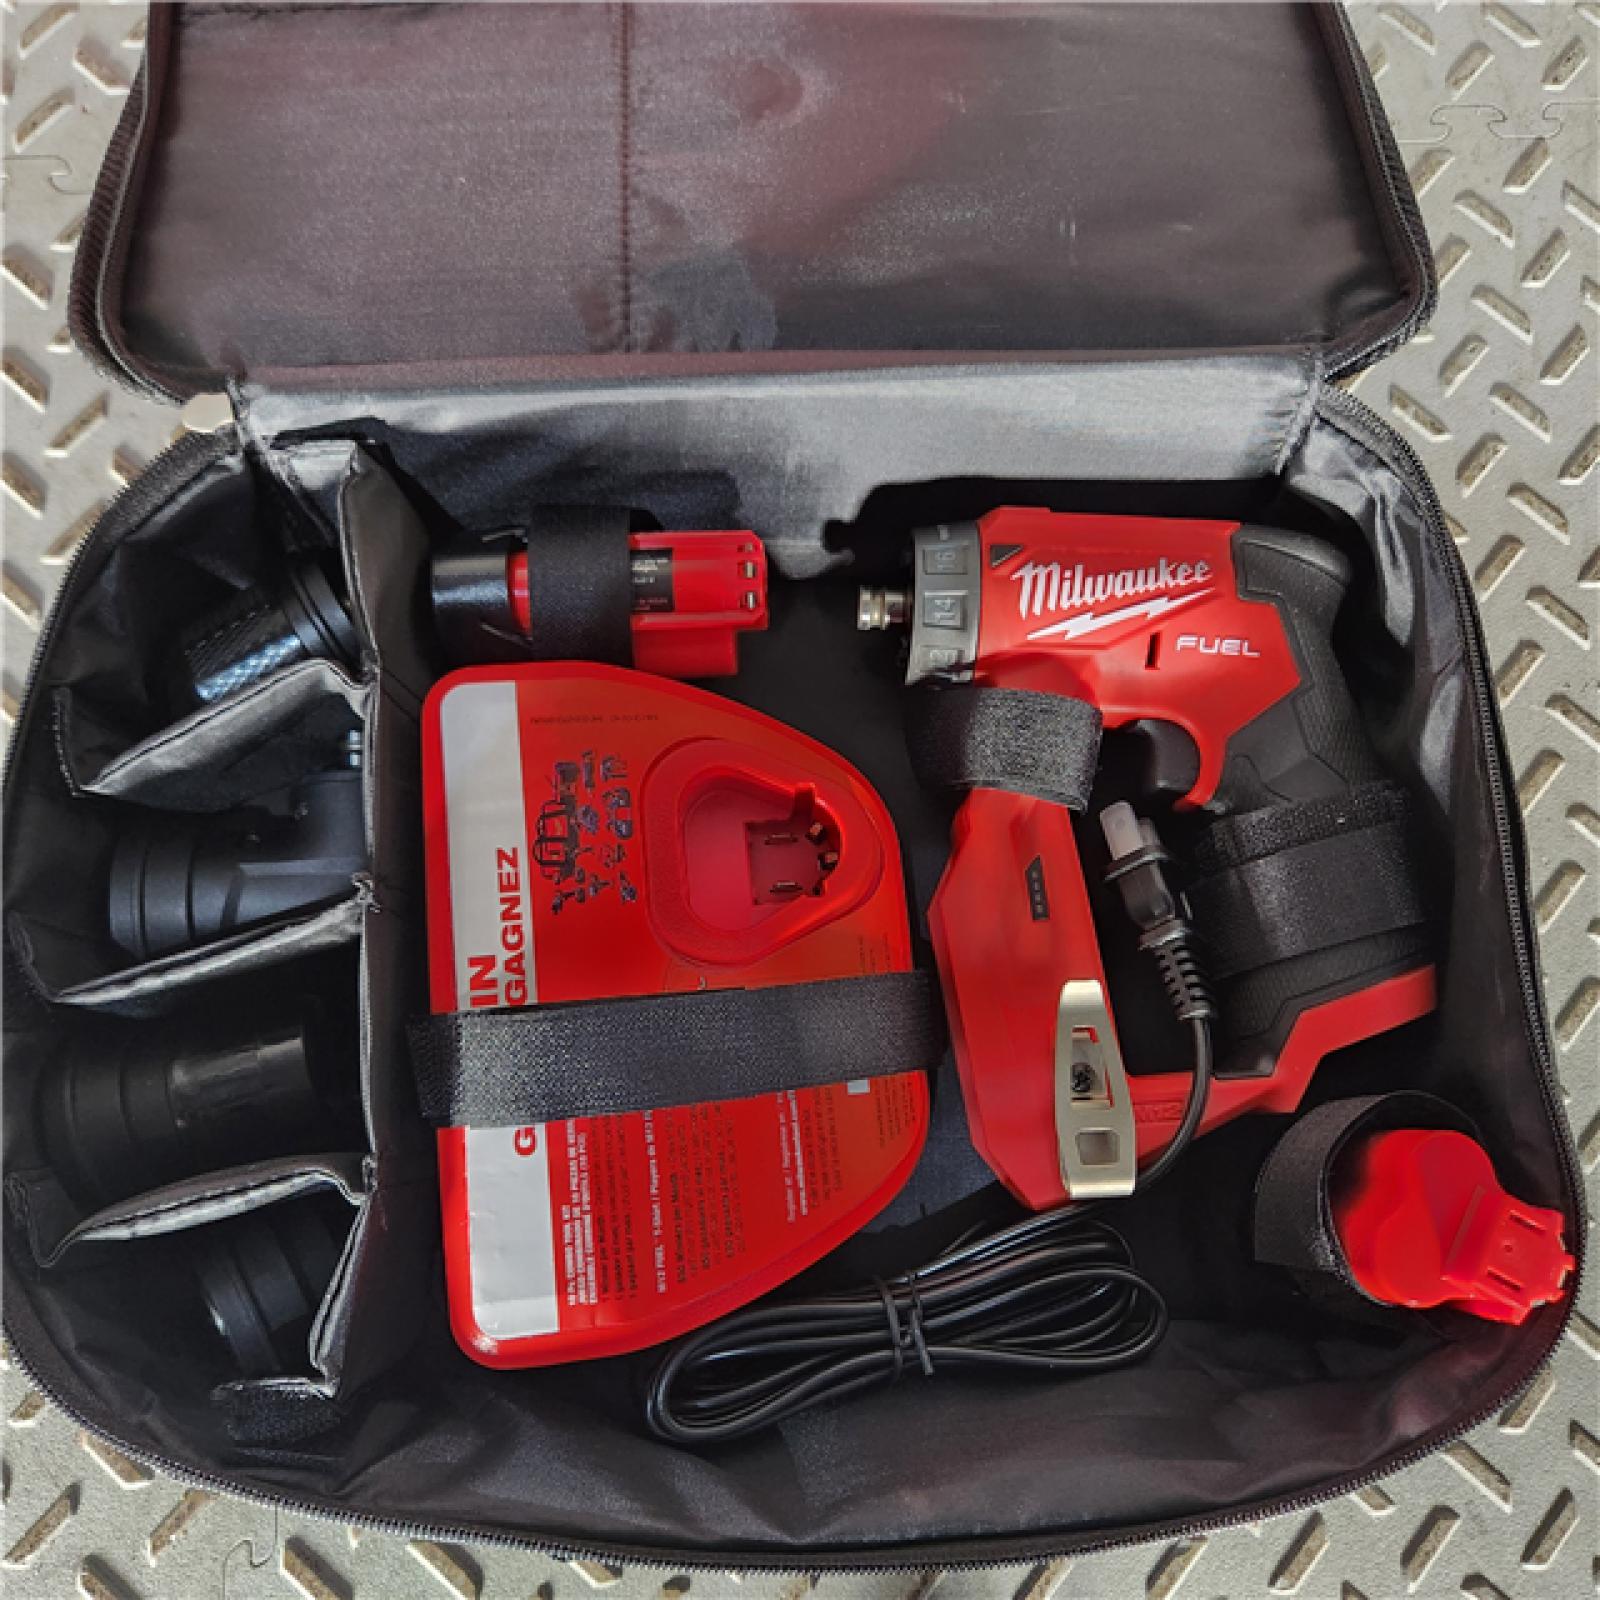 Houston location- AS-IS MILWAUKEE MWK2505-22 M12 Fuel Installation Drill & Driver Kit Appears in new condition